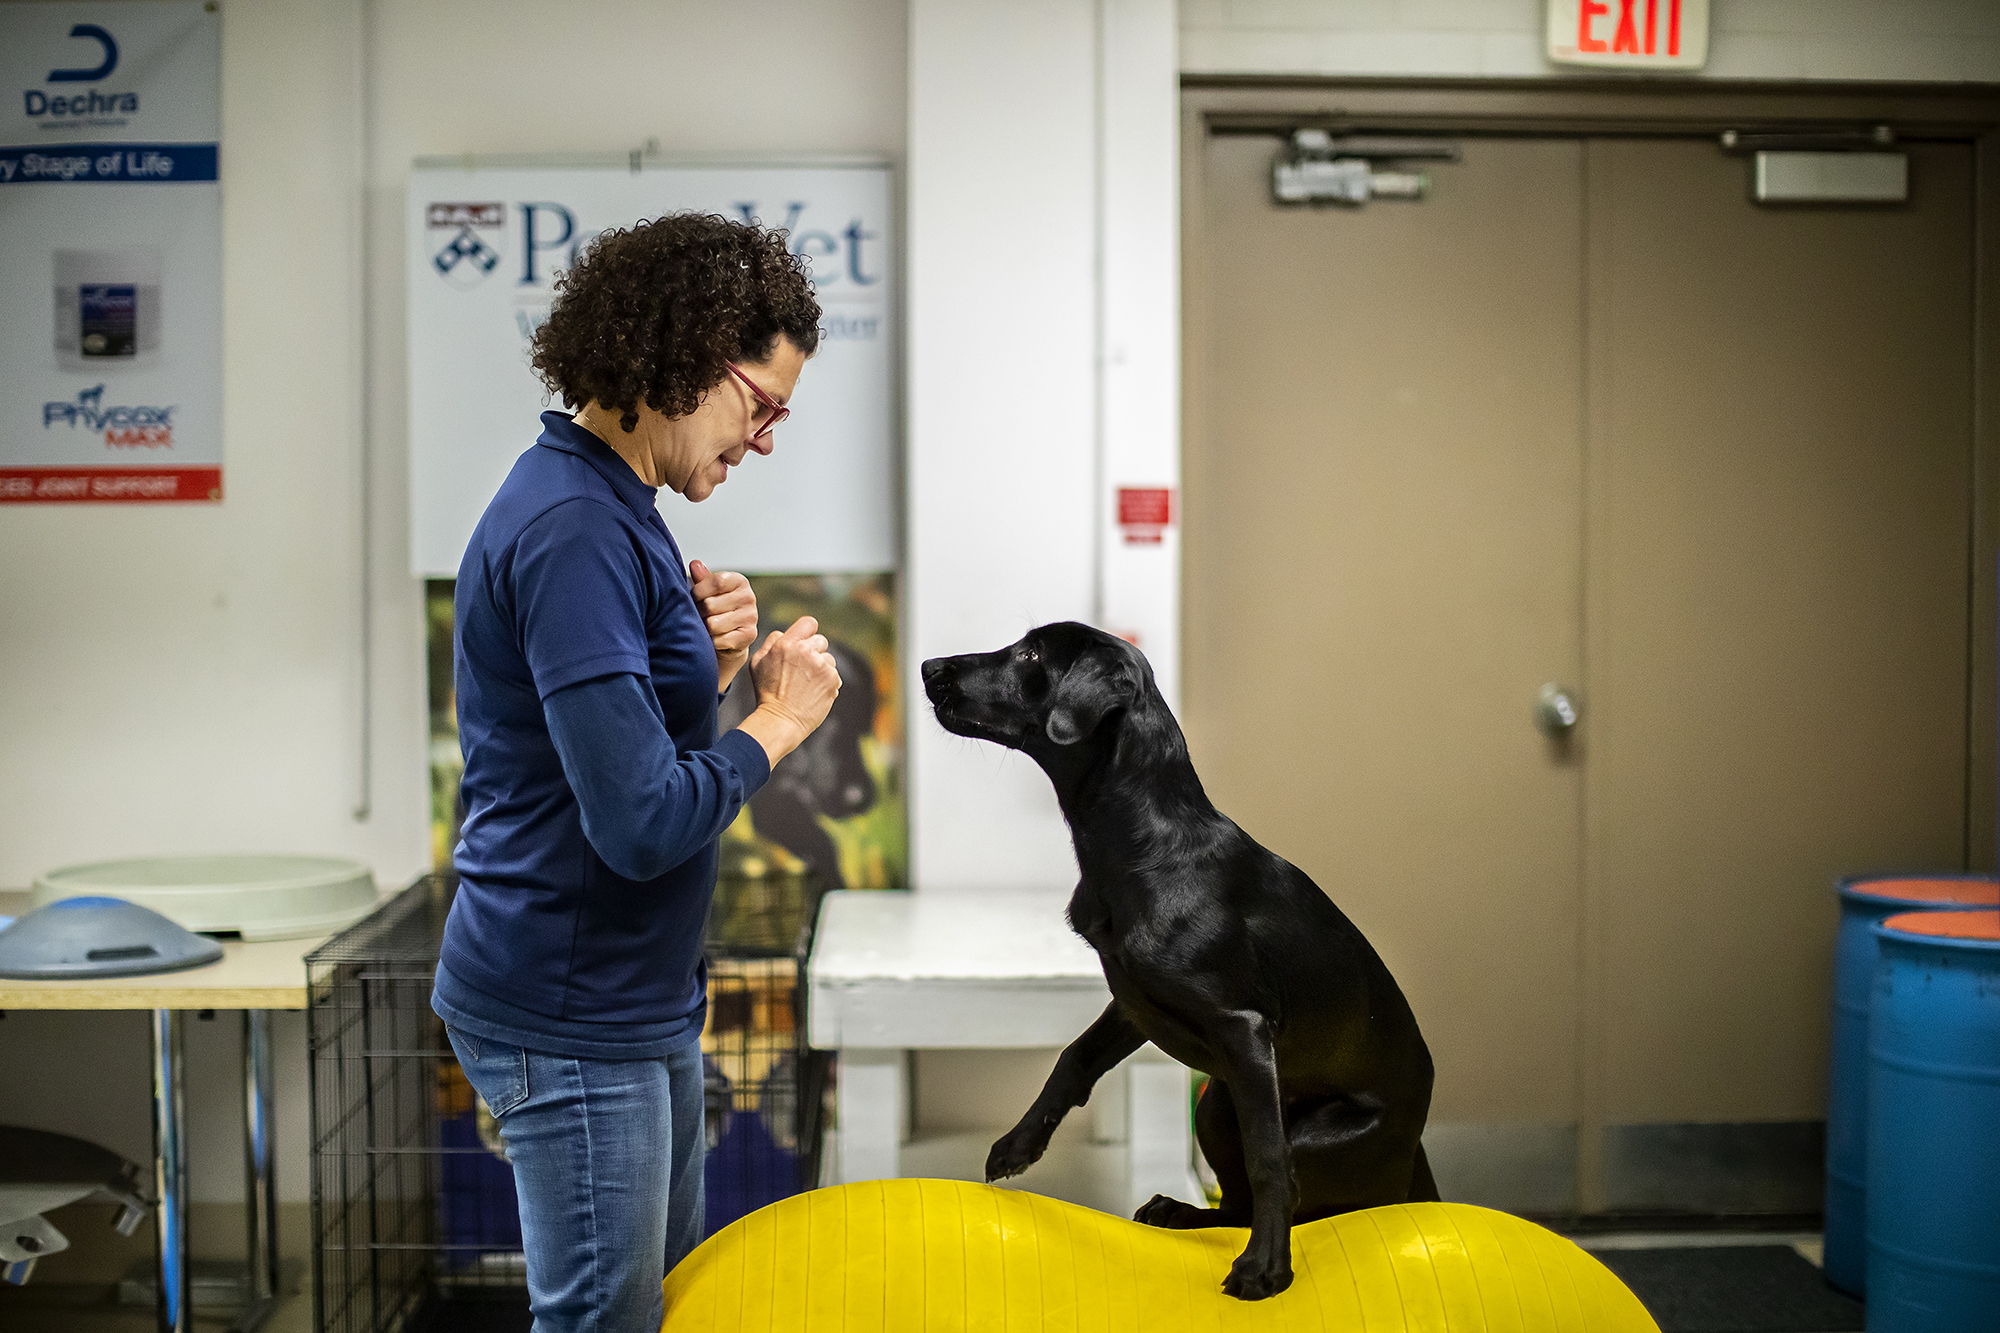 Cynthia Otto with black lab balancing on a rubber ball